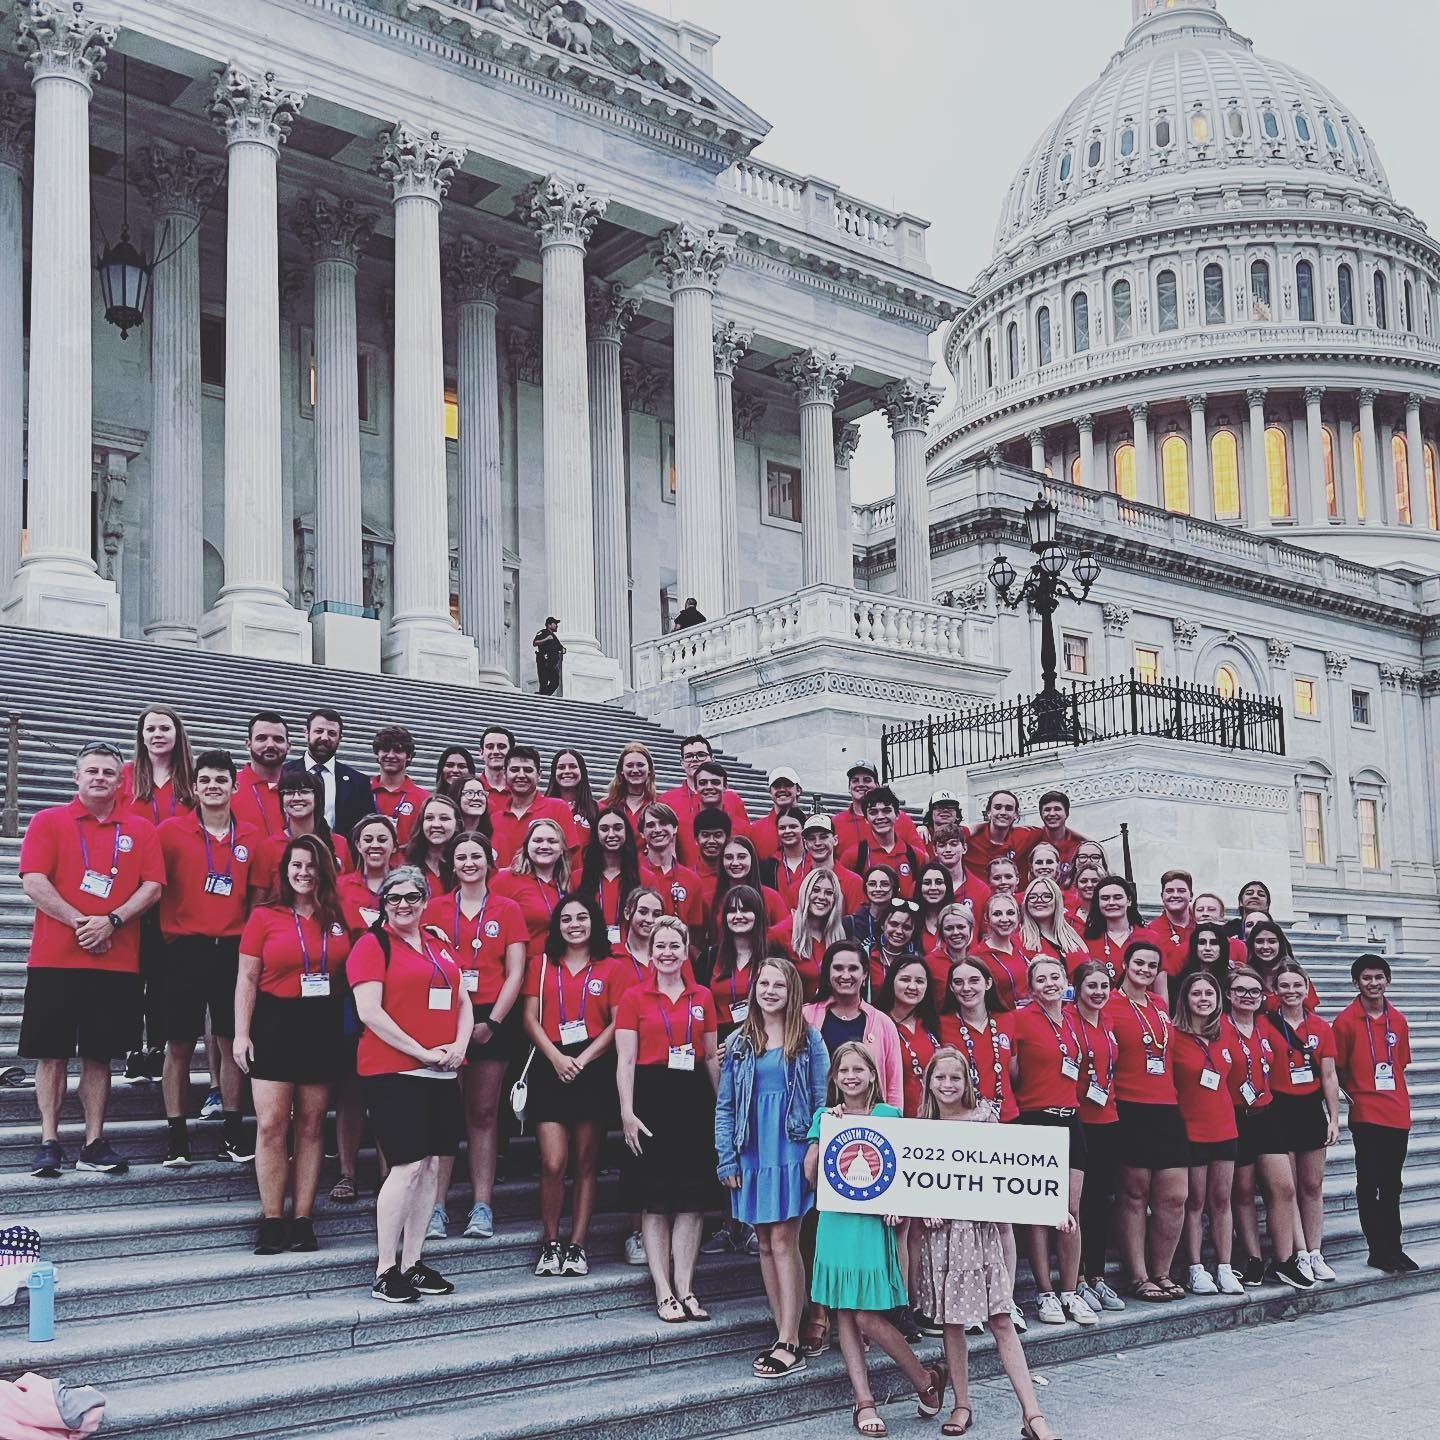 All Oklahoma Youth Tour participants at the U.S. Capitol.